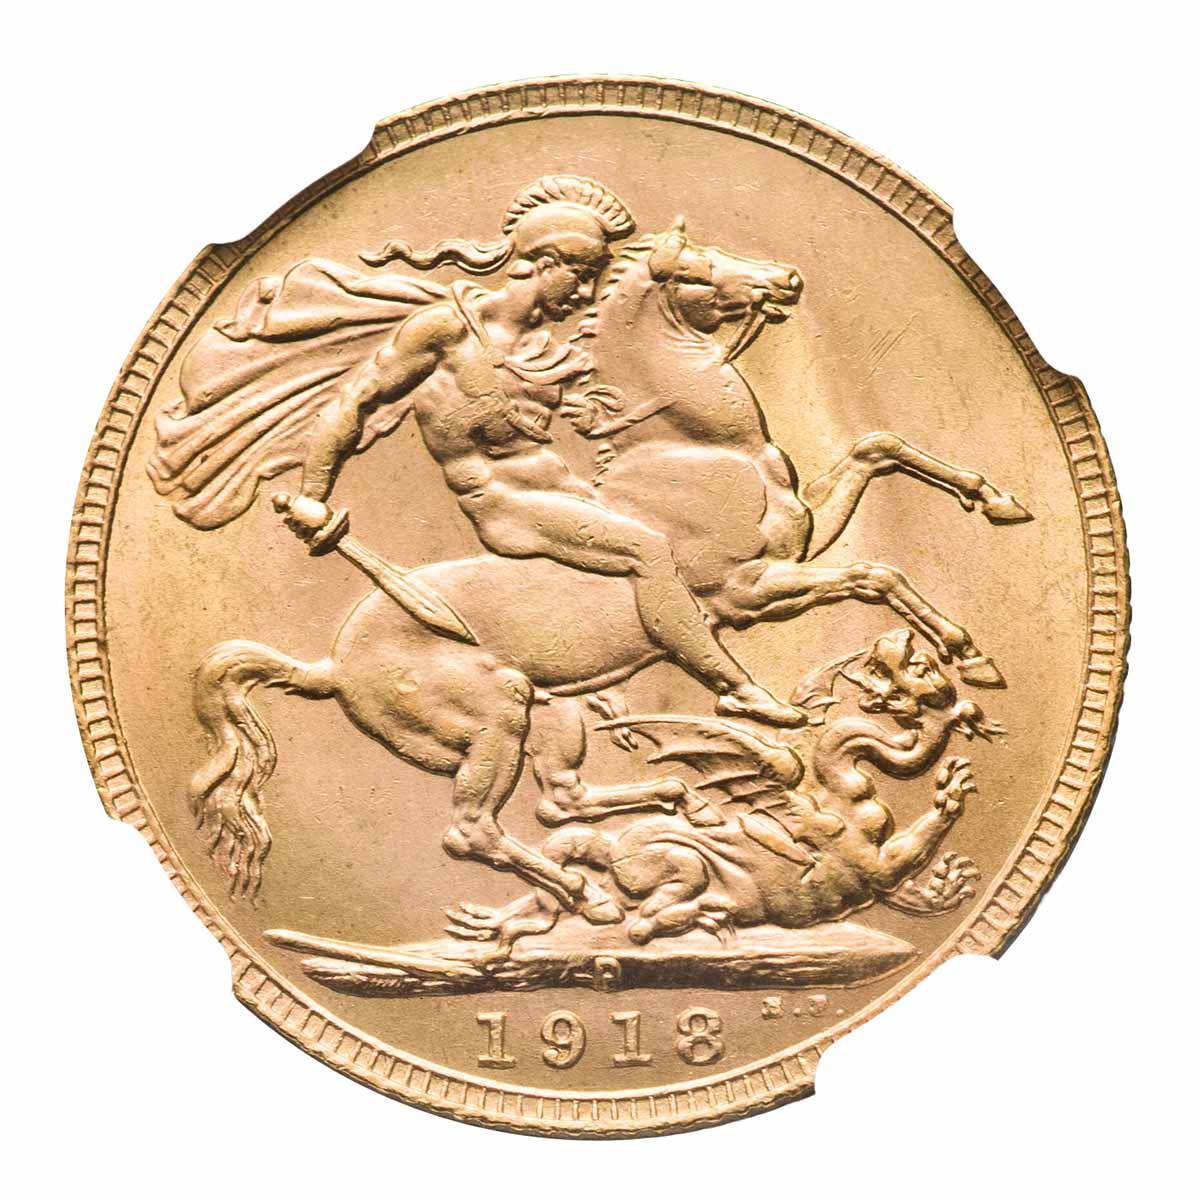 George V 1918P Gold Sovereign NGC MS64 (Choice Uncirculated)